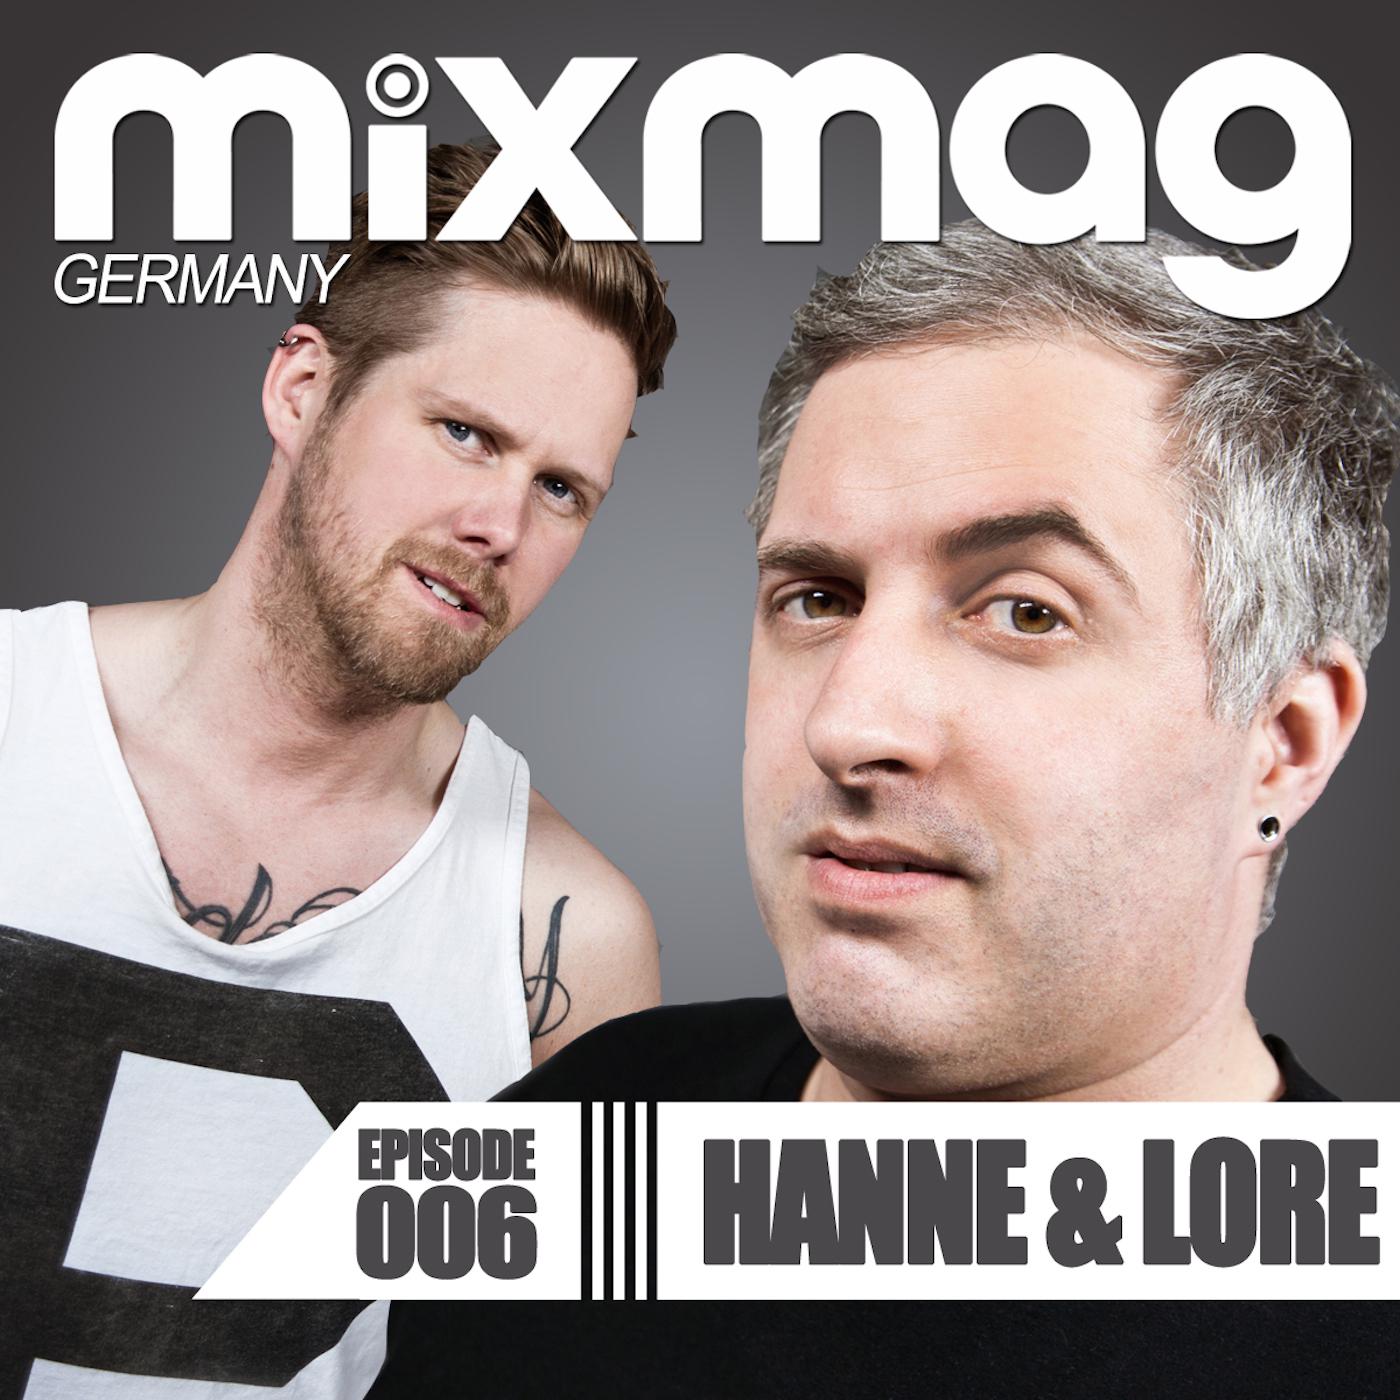 Mixmag Germany - Episode 006: Hanne & Lore